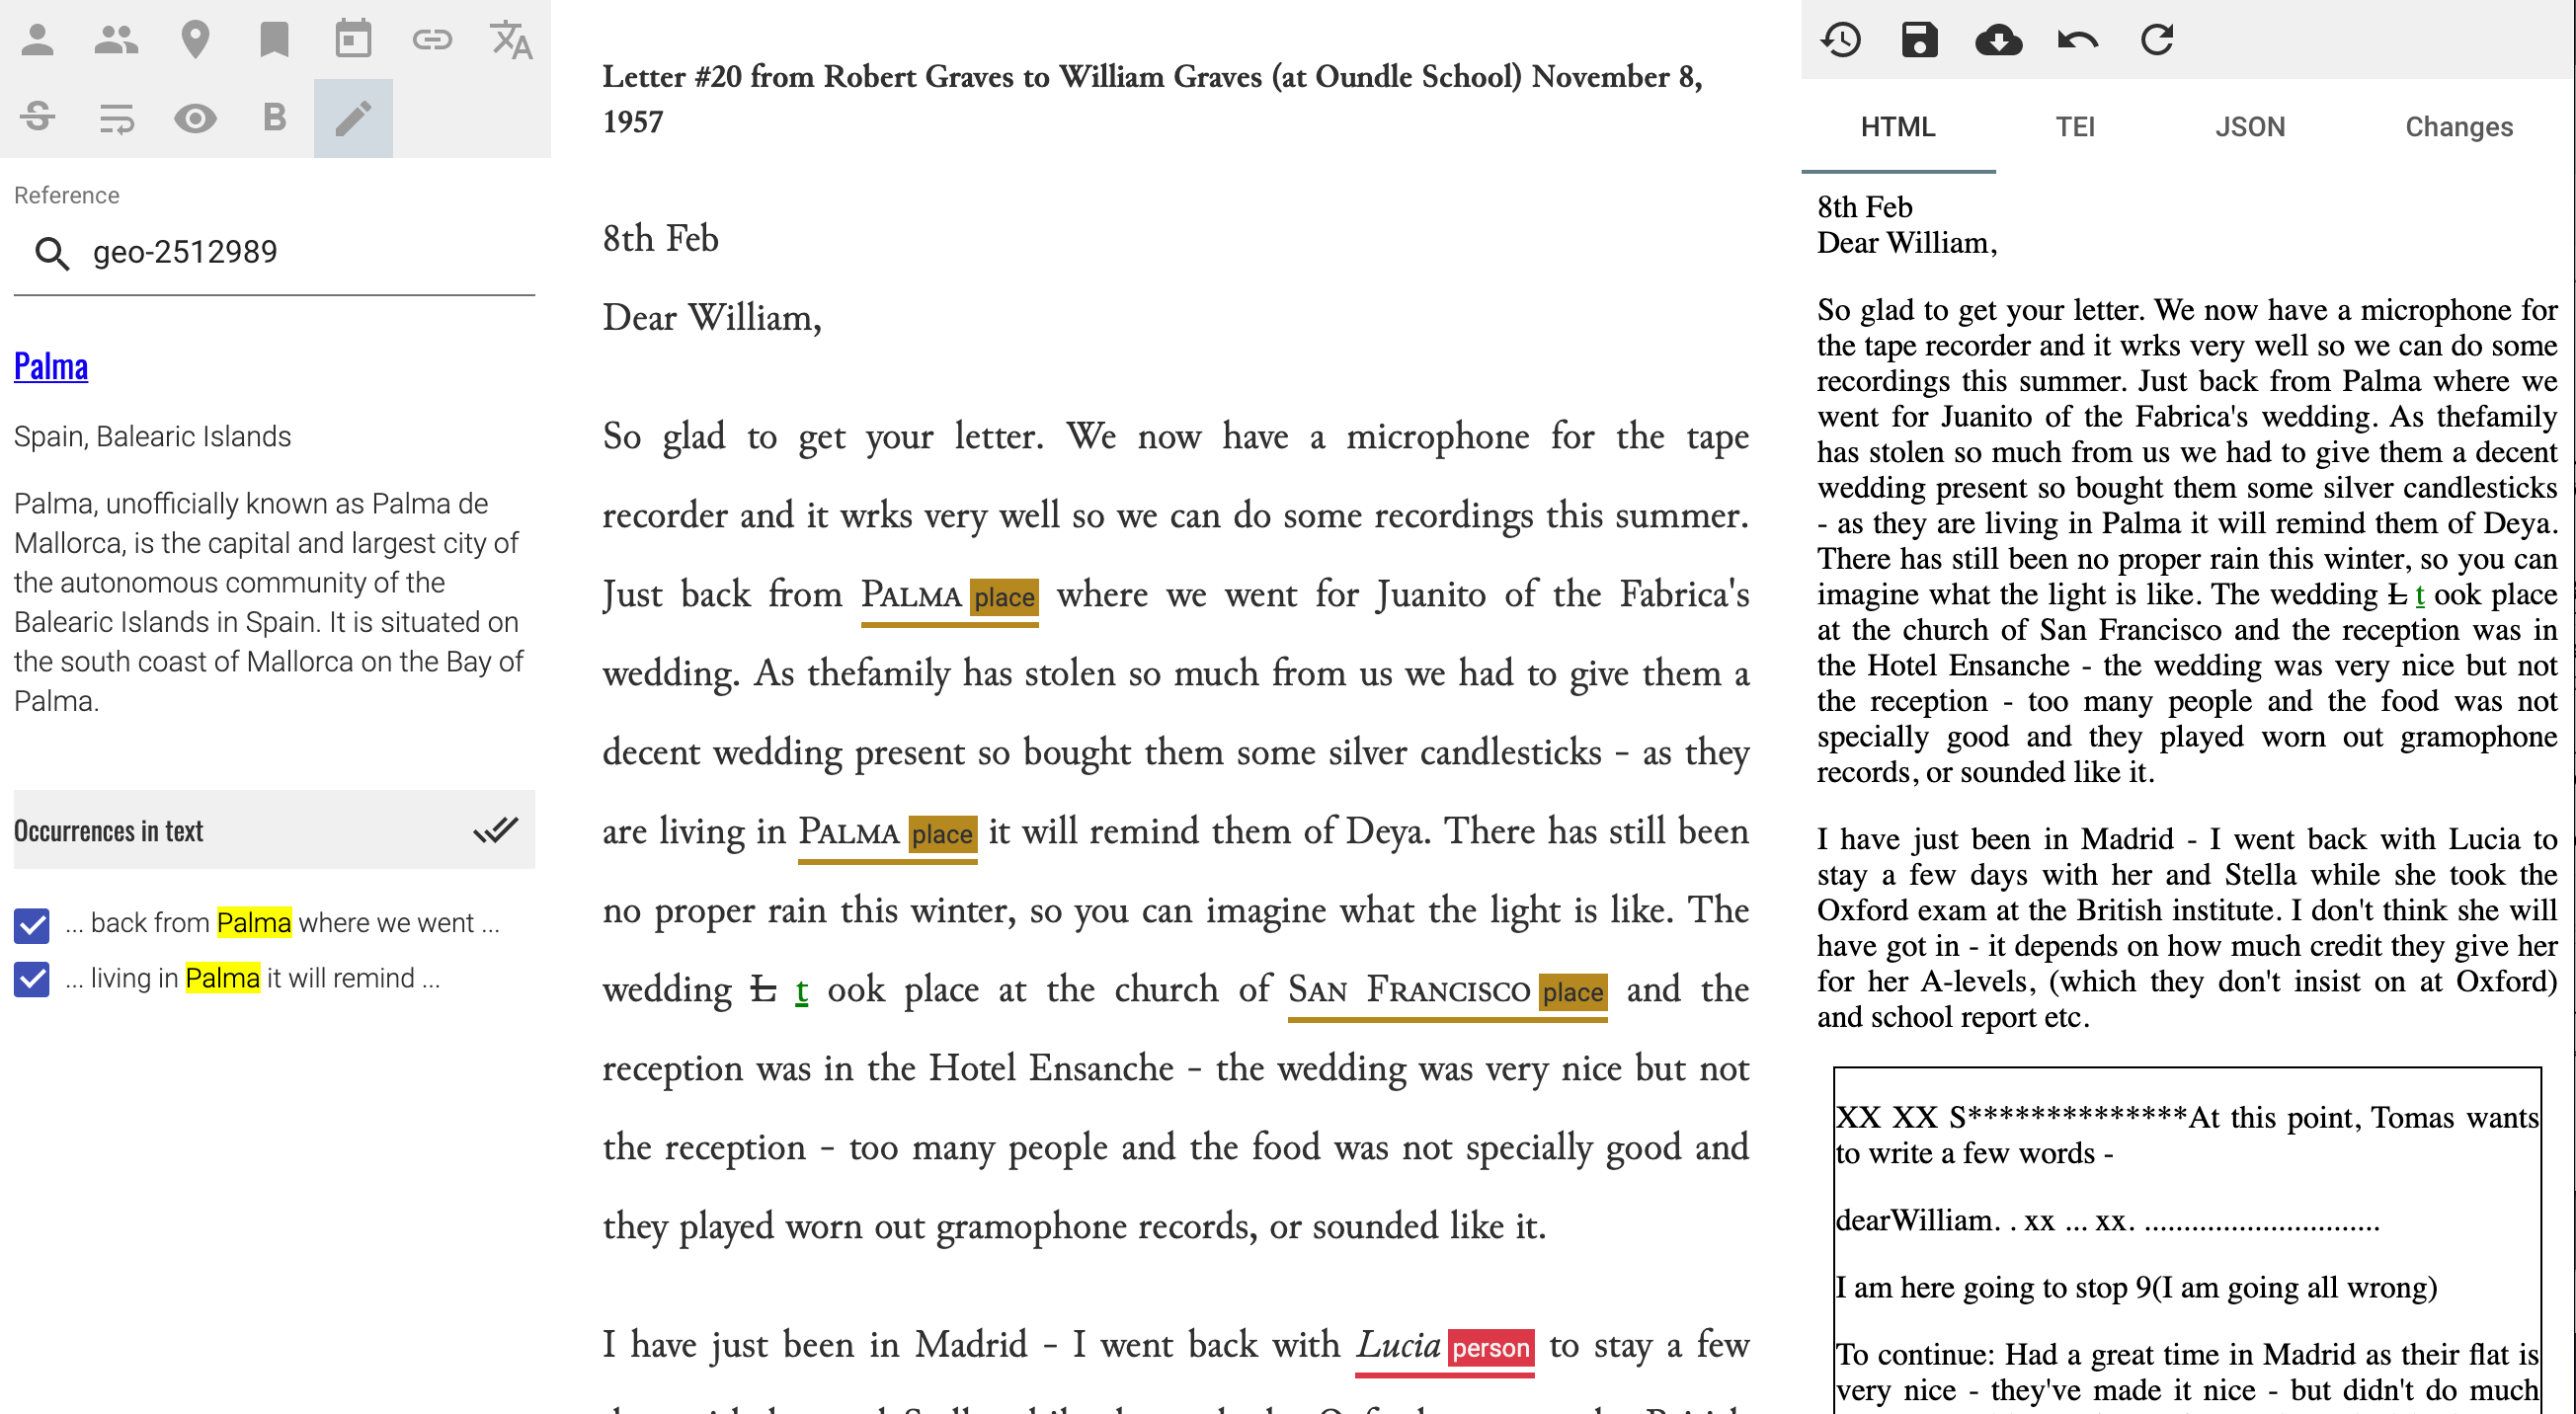 Annotation Overview